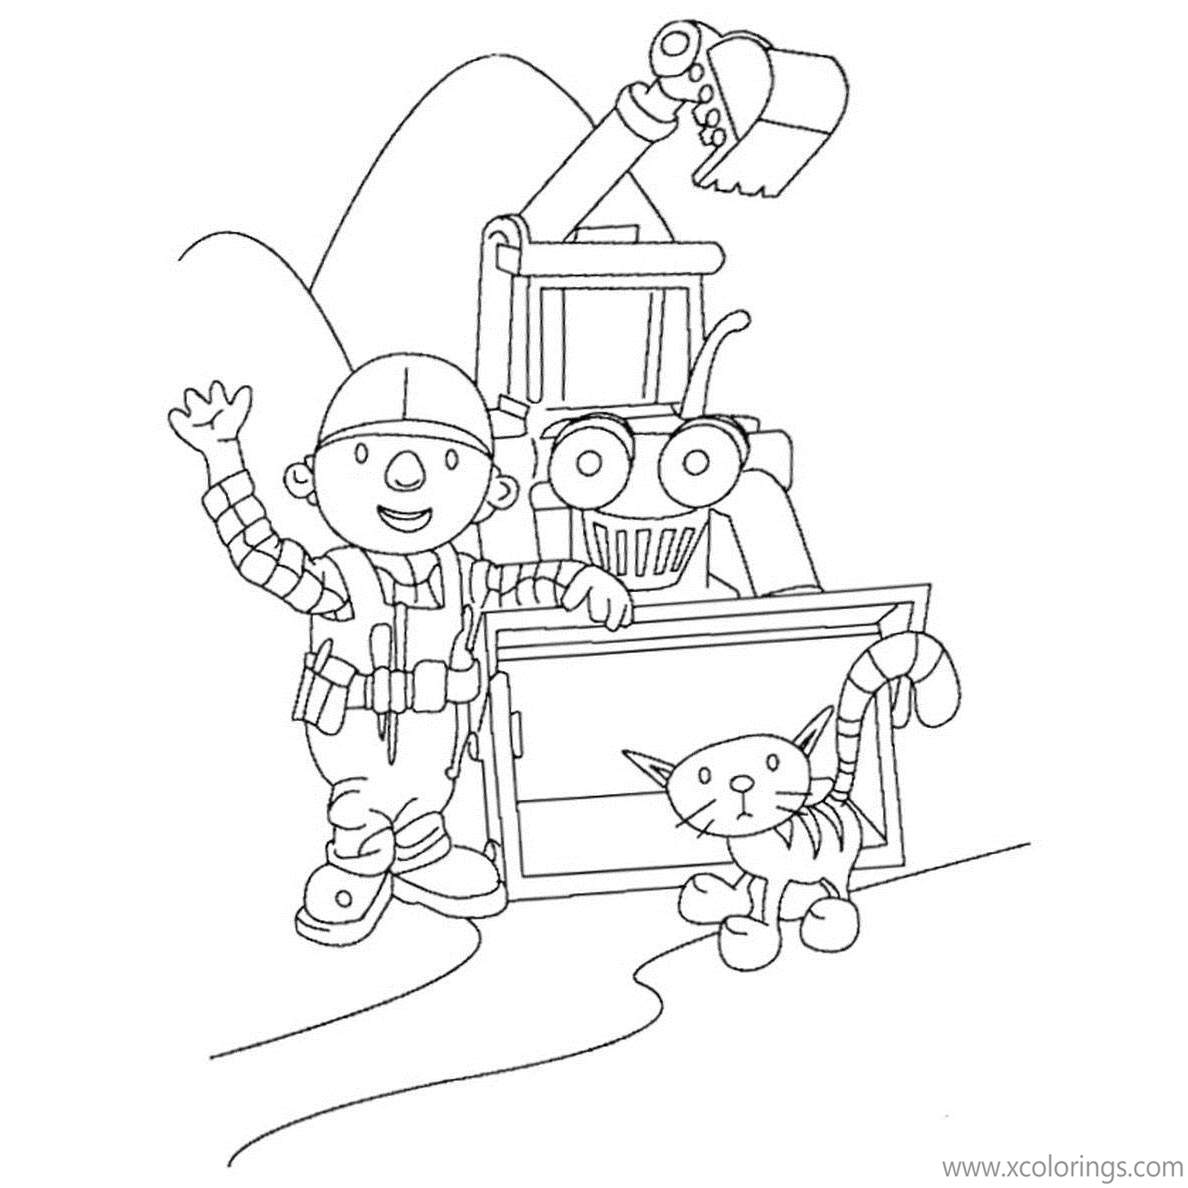 Free Bob The Builder Coloring Pages Pilchard and Scoop printable